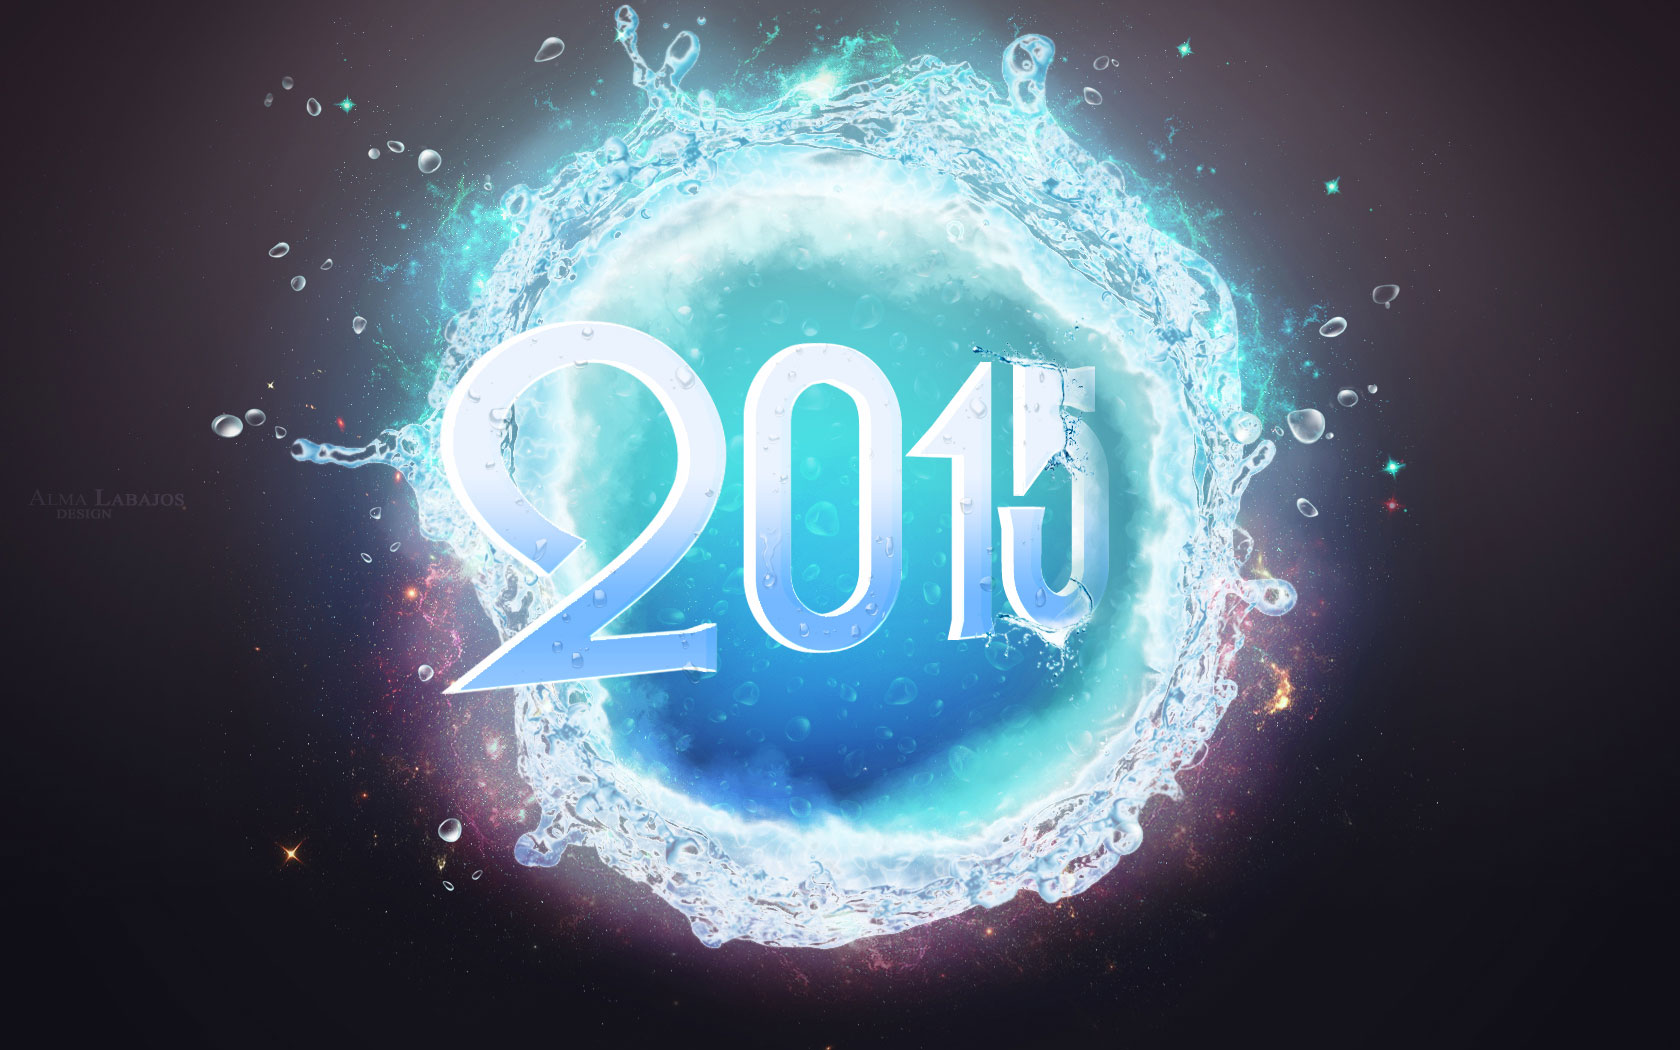 Happy New Year 2015 Wallpapers Images Cover photos